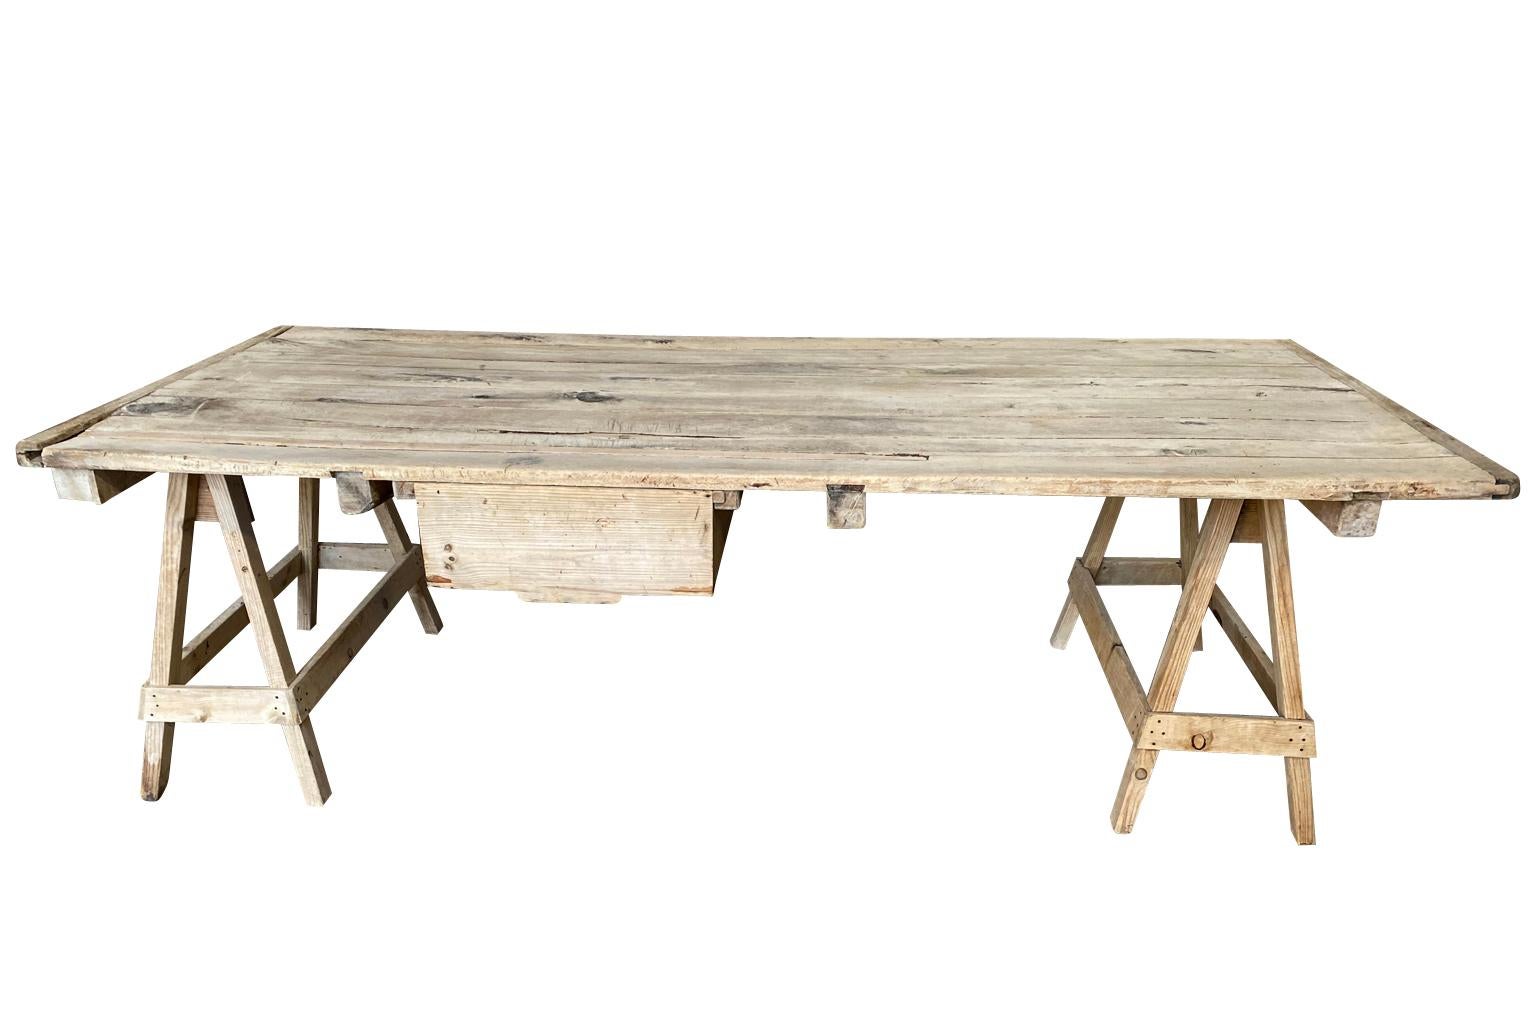 A very beautiful late 19th century table De Coutelier - knife maker's table from the Provence region of France. Handsomely constructed from pine and beechwood on saw horse legs and a large drawer for knife storage. A terrific table that will serve